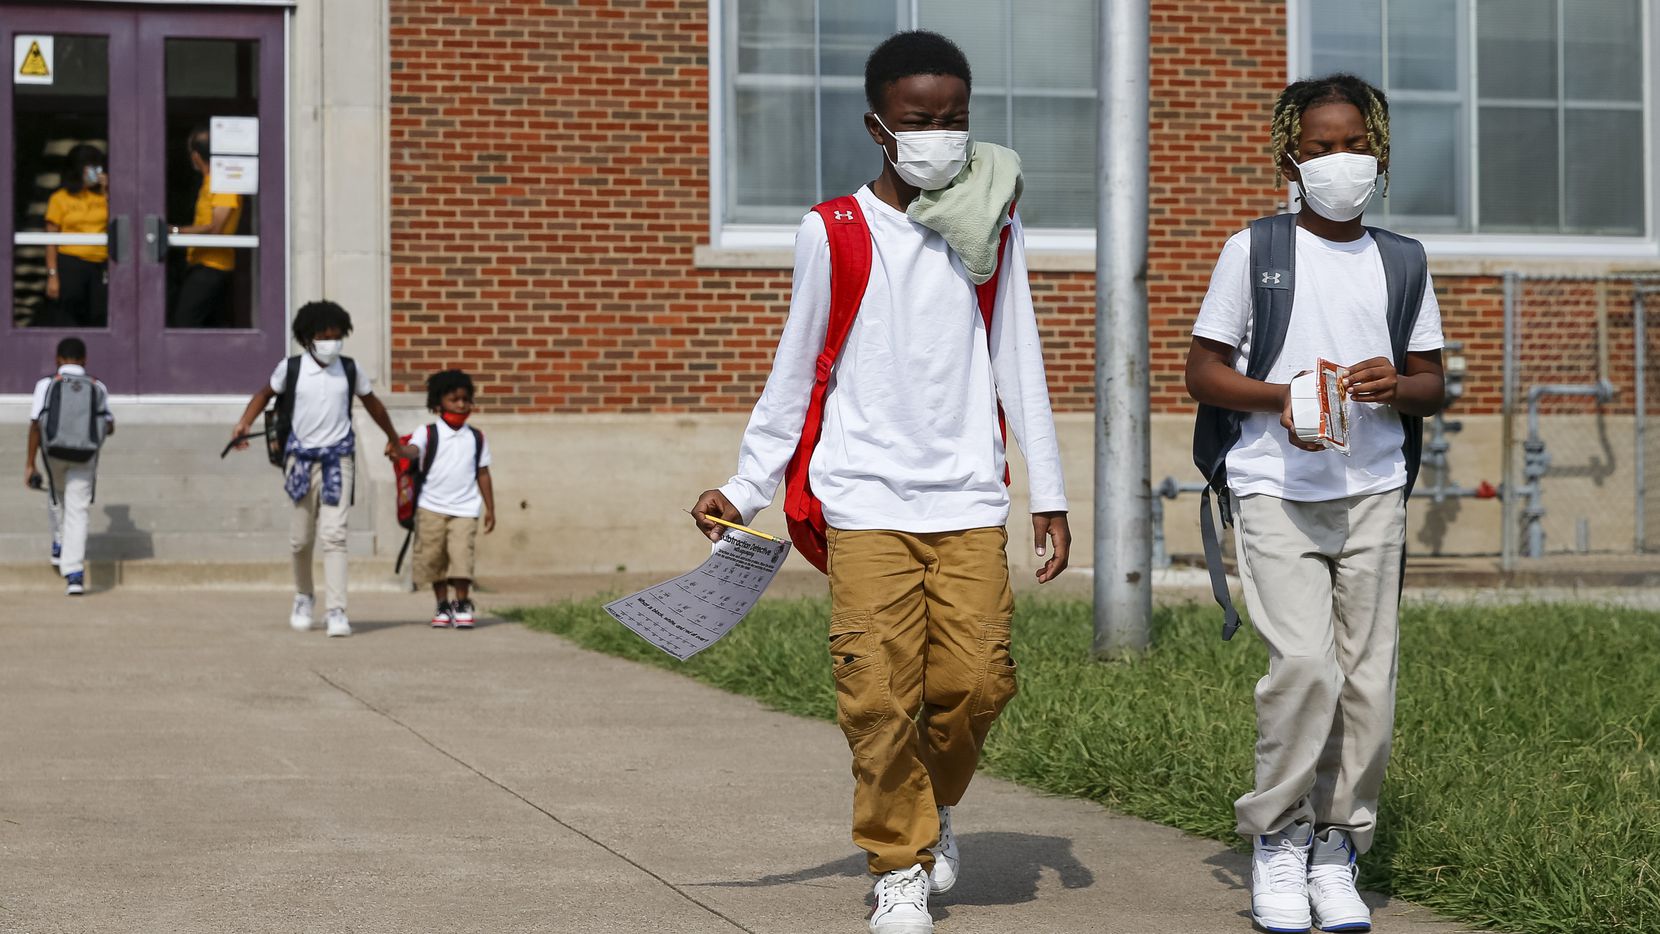 Jerrell Brown (left), 9, walks with Jayce Williams, 7, after a day of classes at Paul L. Dunbar Learning Center in Dallas. Dunbar made huge strides after instituting Dallas ISD’s signature turnaround program, Accelerating Campus Excellence, which provides additional resources to struggling schools.